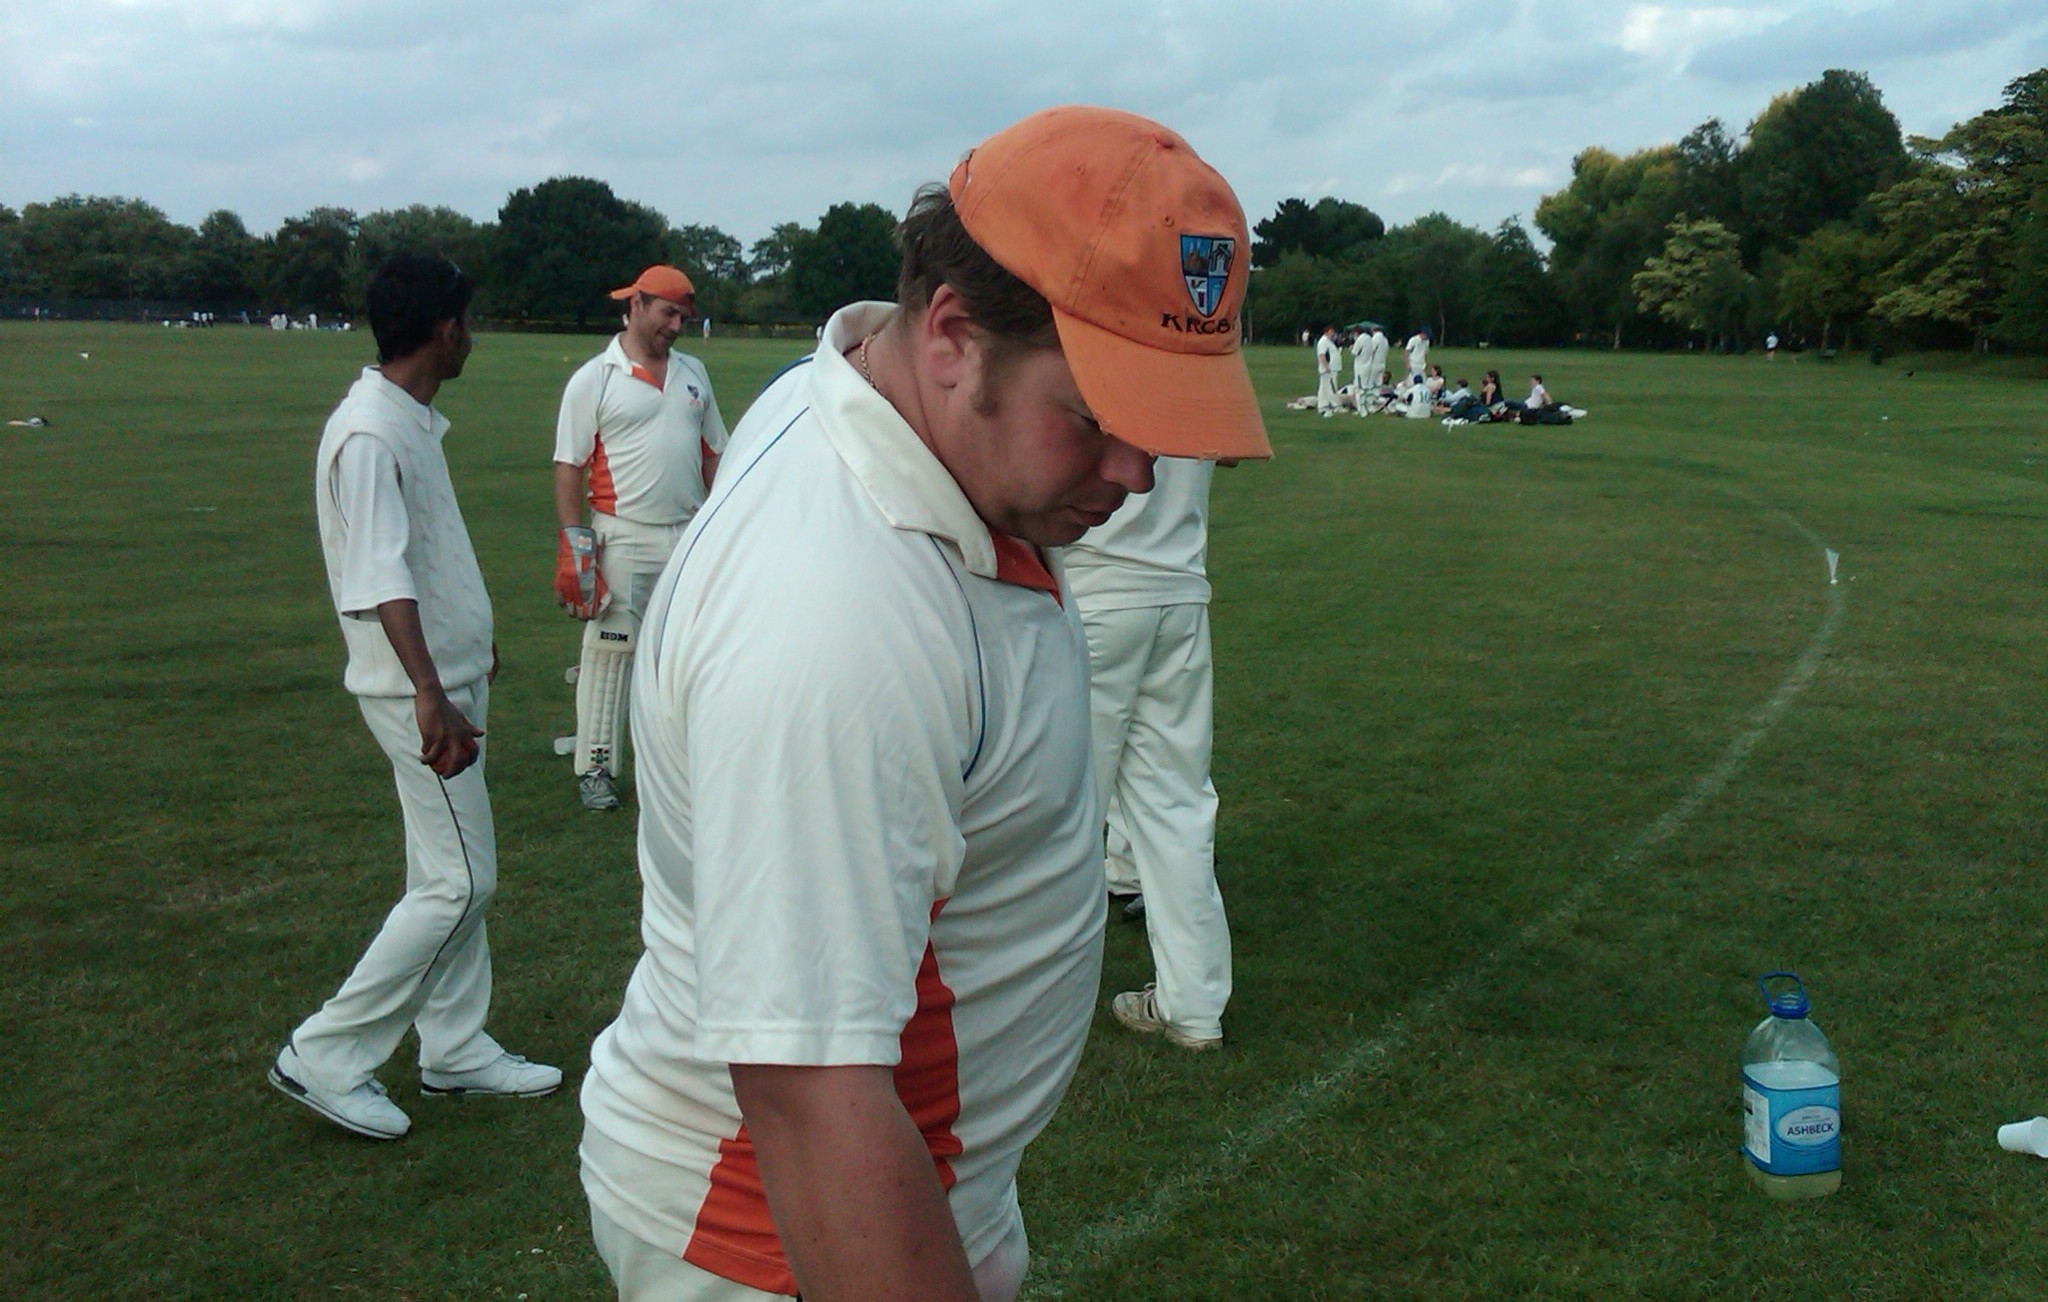 Disappointed ... captain Matt considers defeat